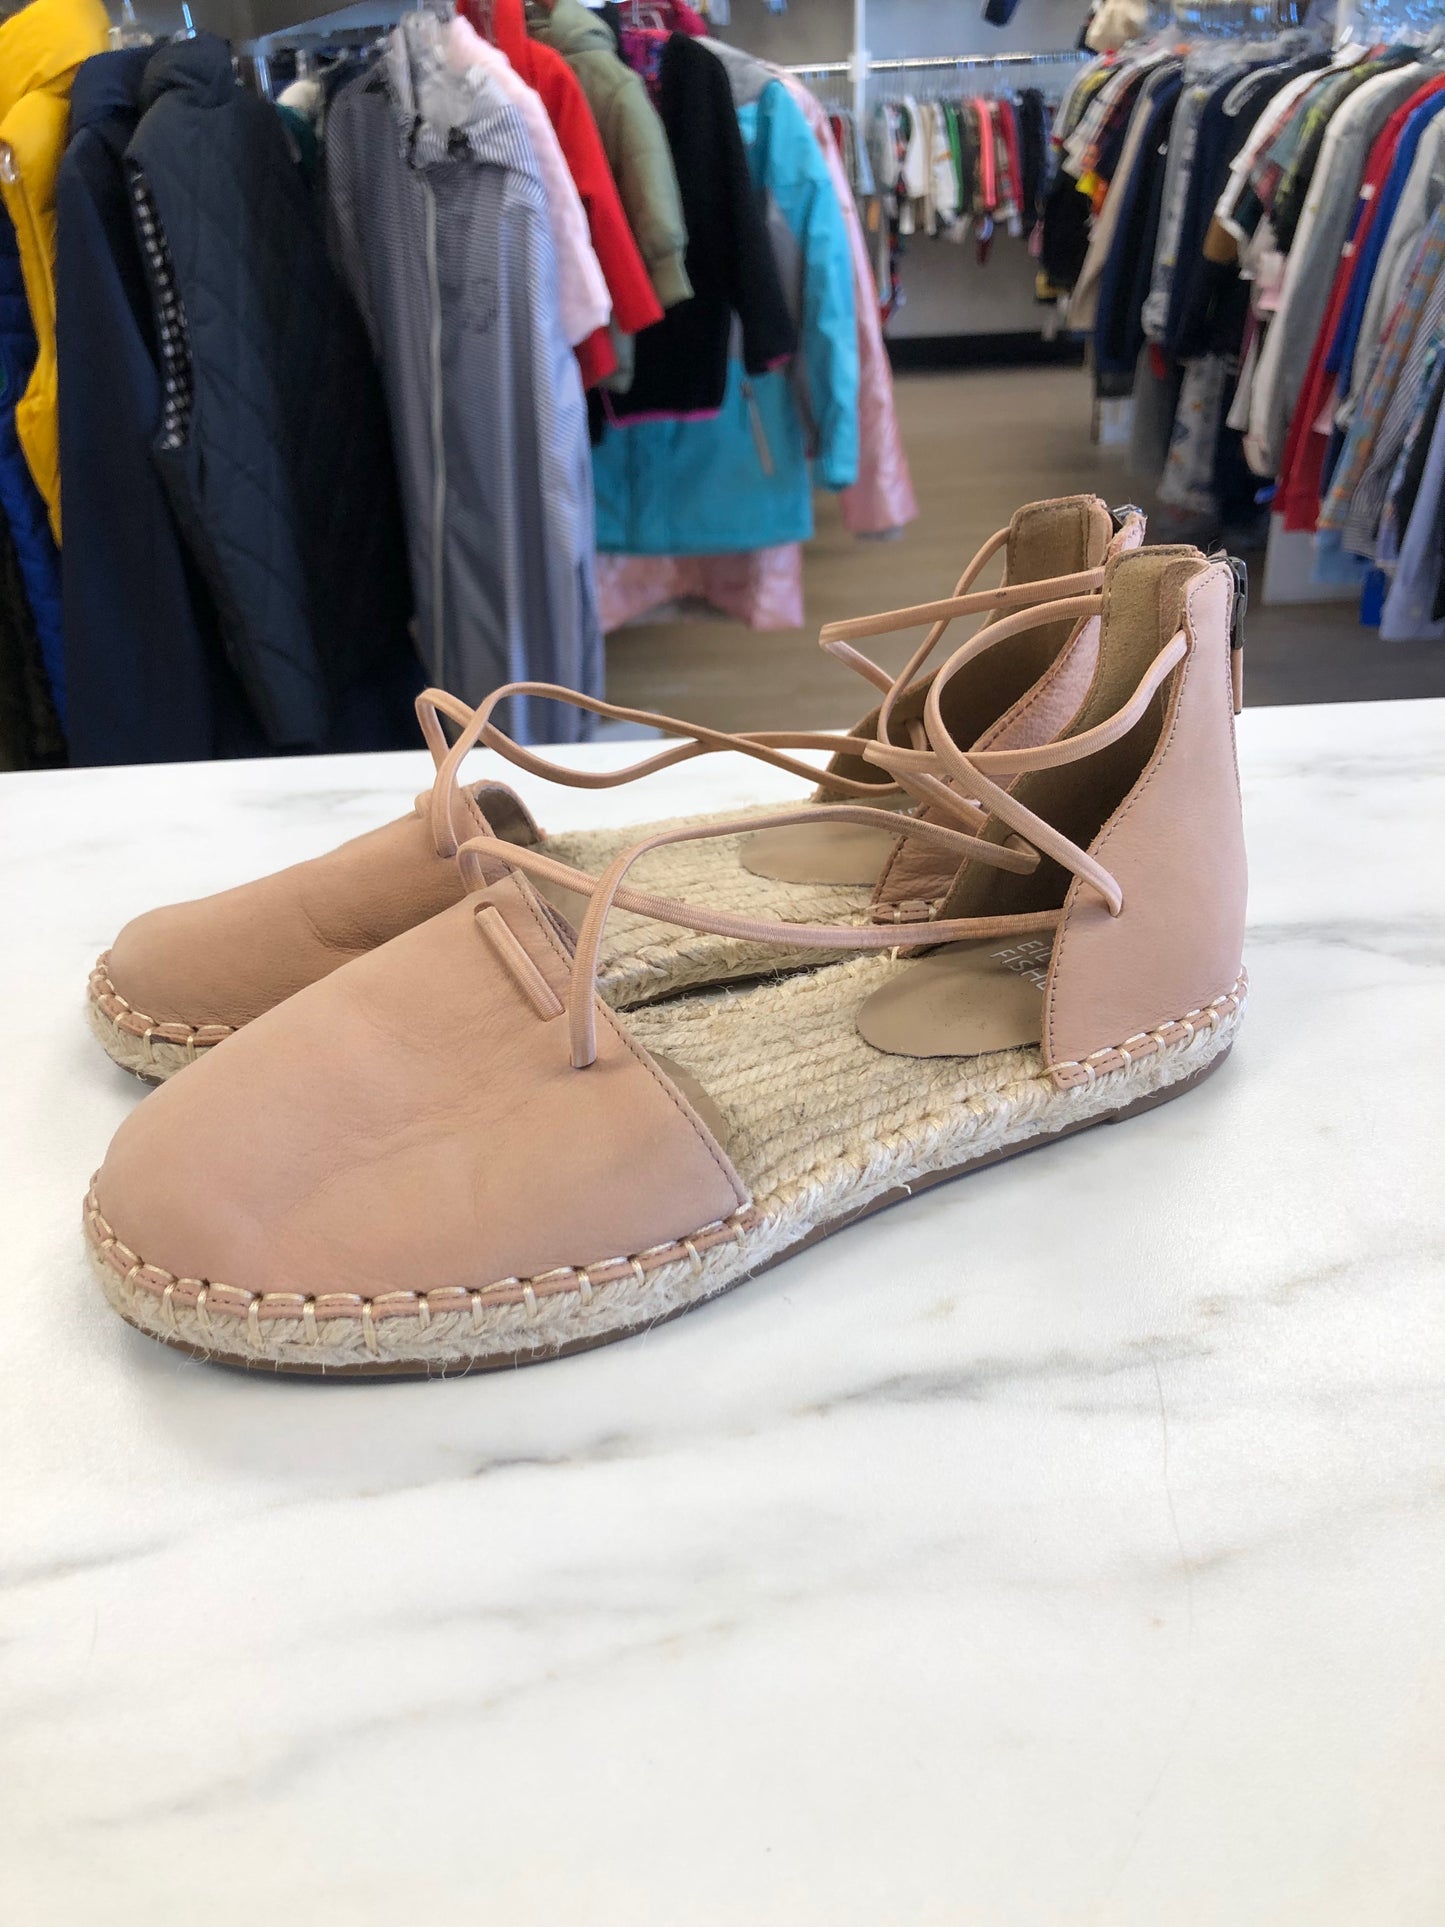 Eileen Fisher Child Size 5 blush Shoes/Boots